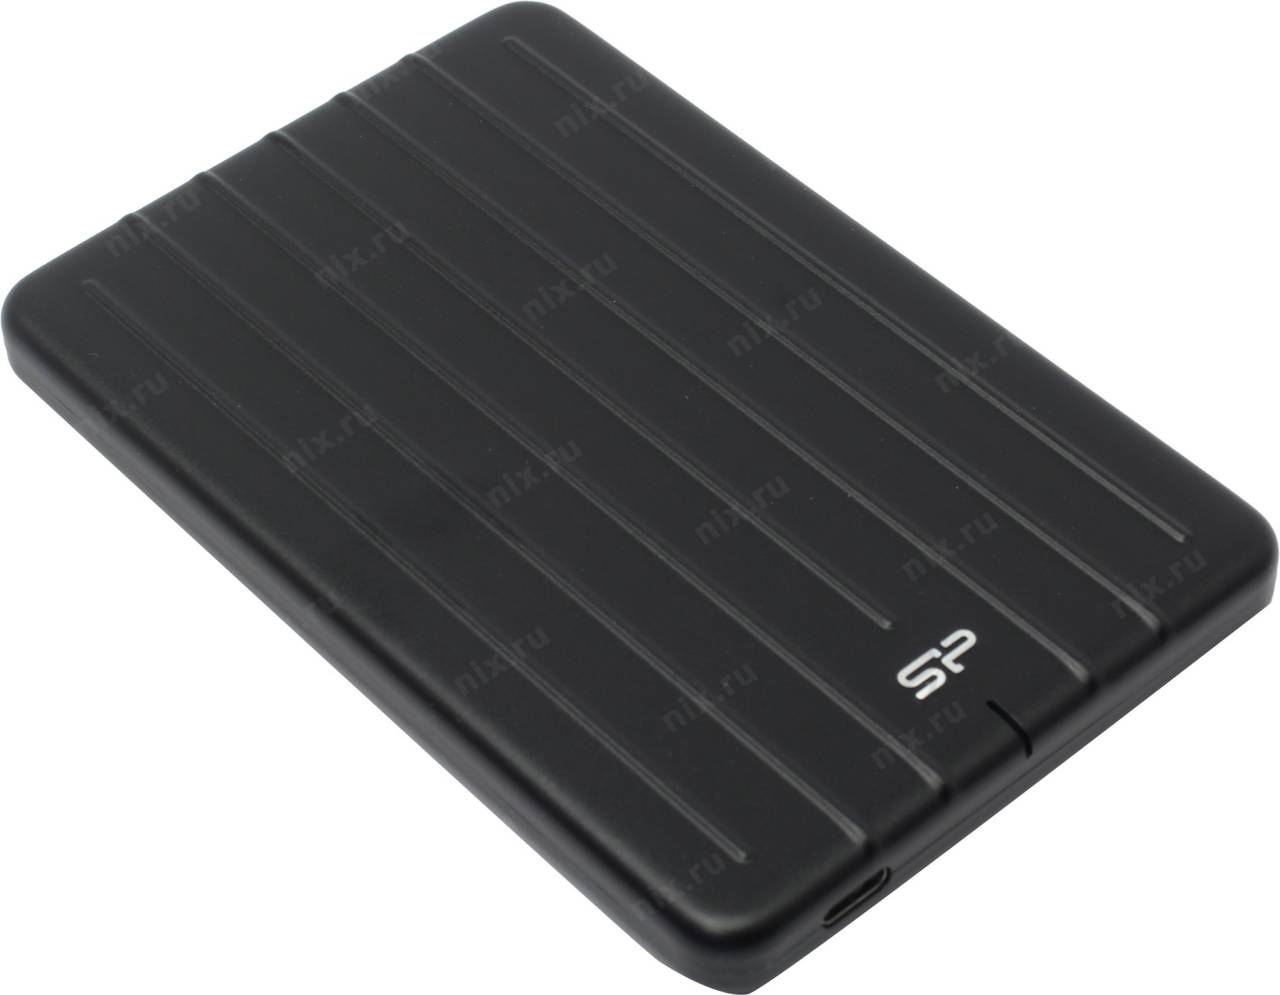   USB3.1-C SSD 256 Gb Silicon Power BOLT B75 Pro [SP256GBPSD75PSCK]